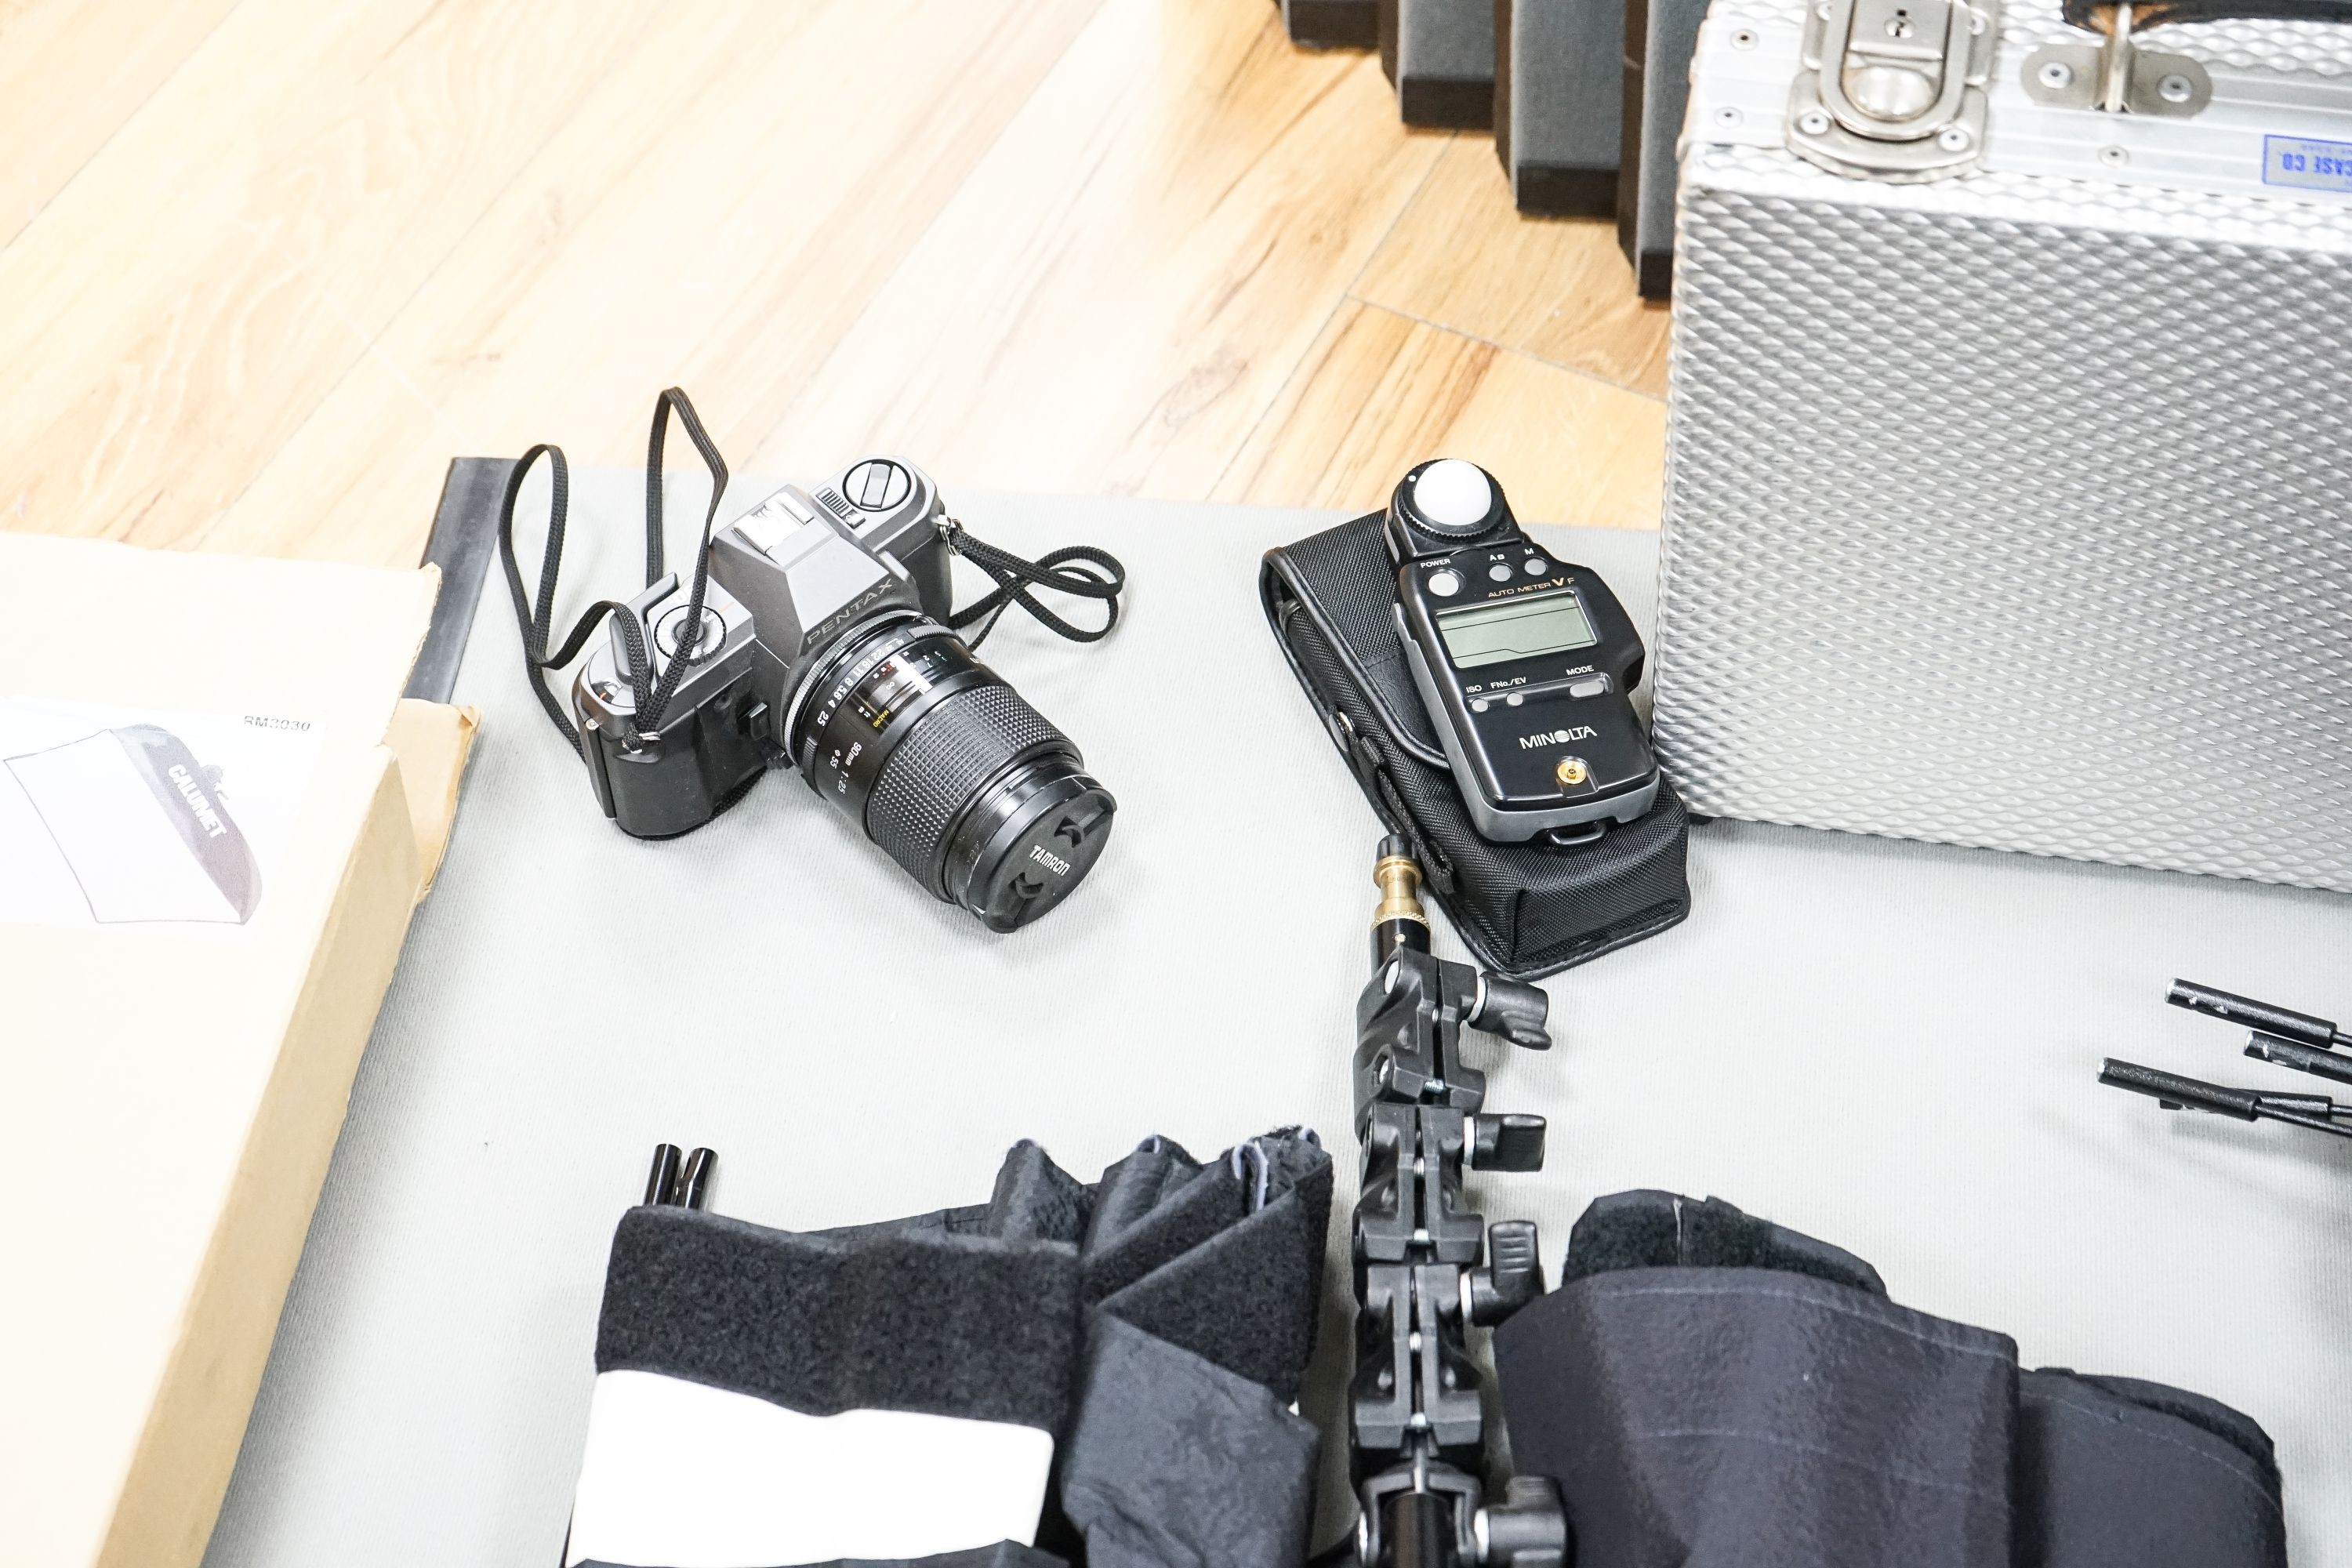 Professional photography equipment including a Pentax P30T SLR camera with Tamron 90mm f/2.5 lens, a pair of Bowens Esprit 1000 lights and a pair of Esprit 500 lights, a pair of Esprit 2 500 lights, various soft boxes, v